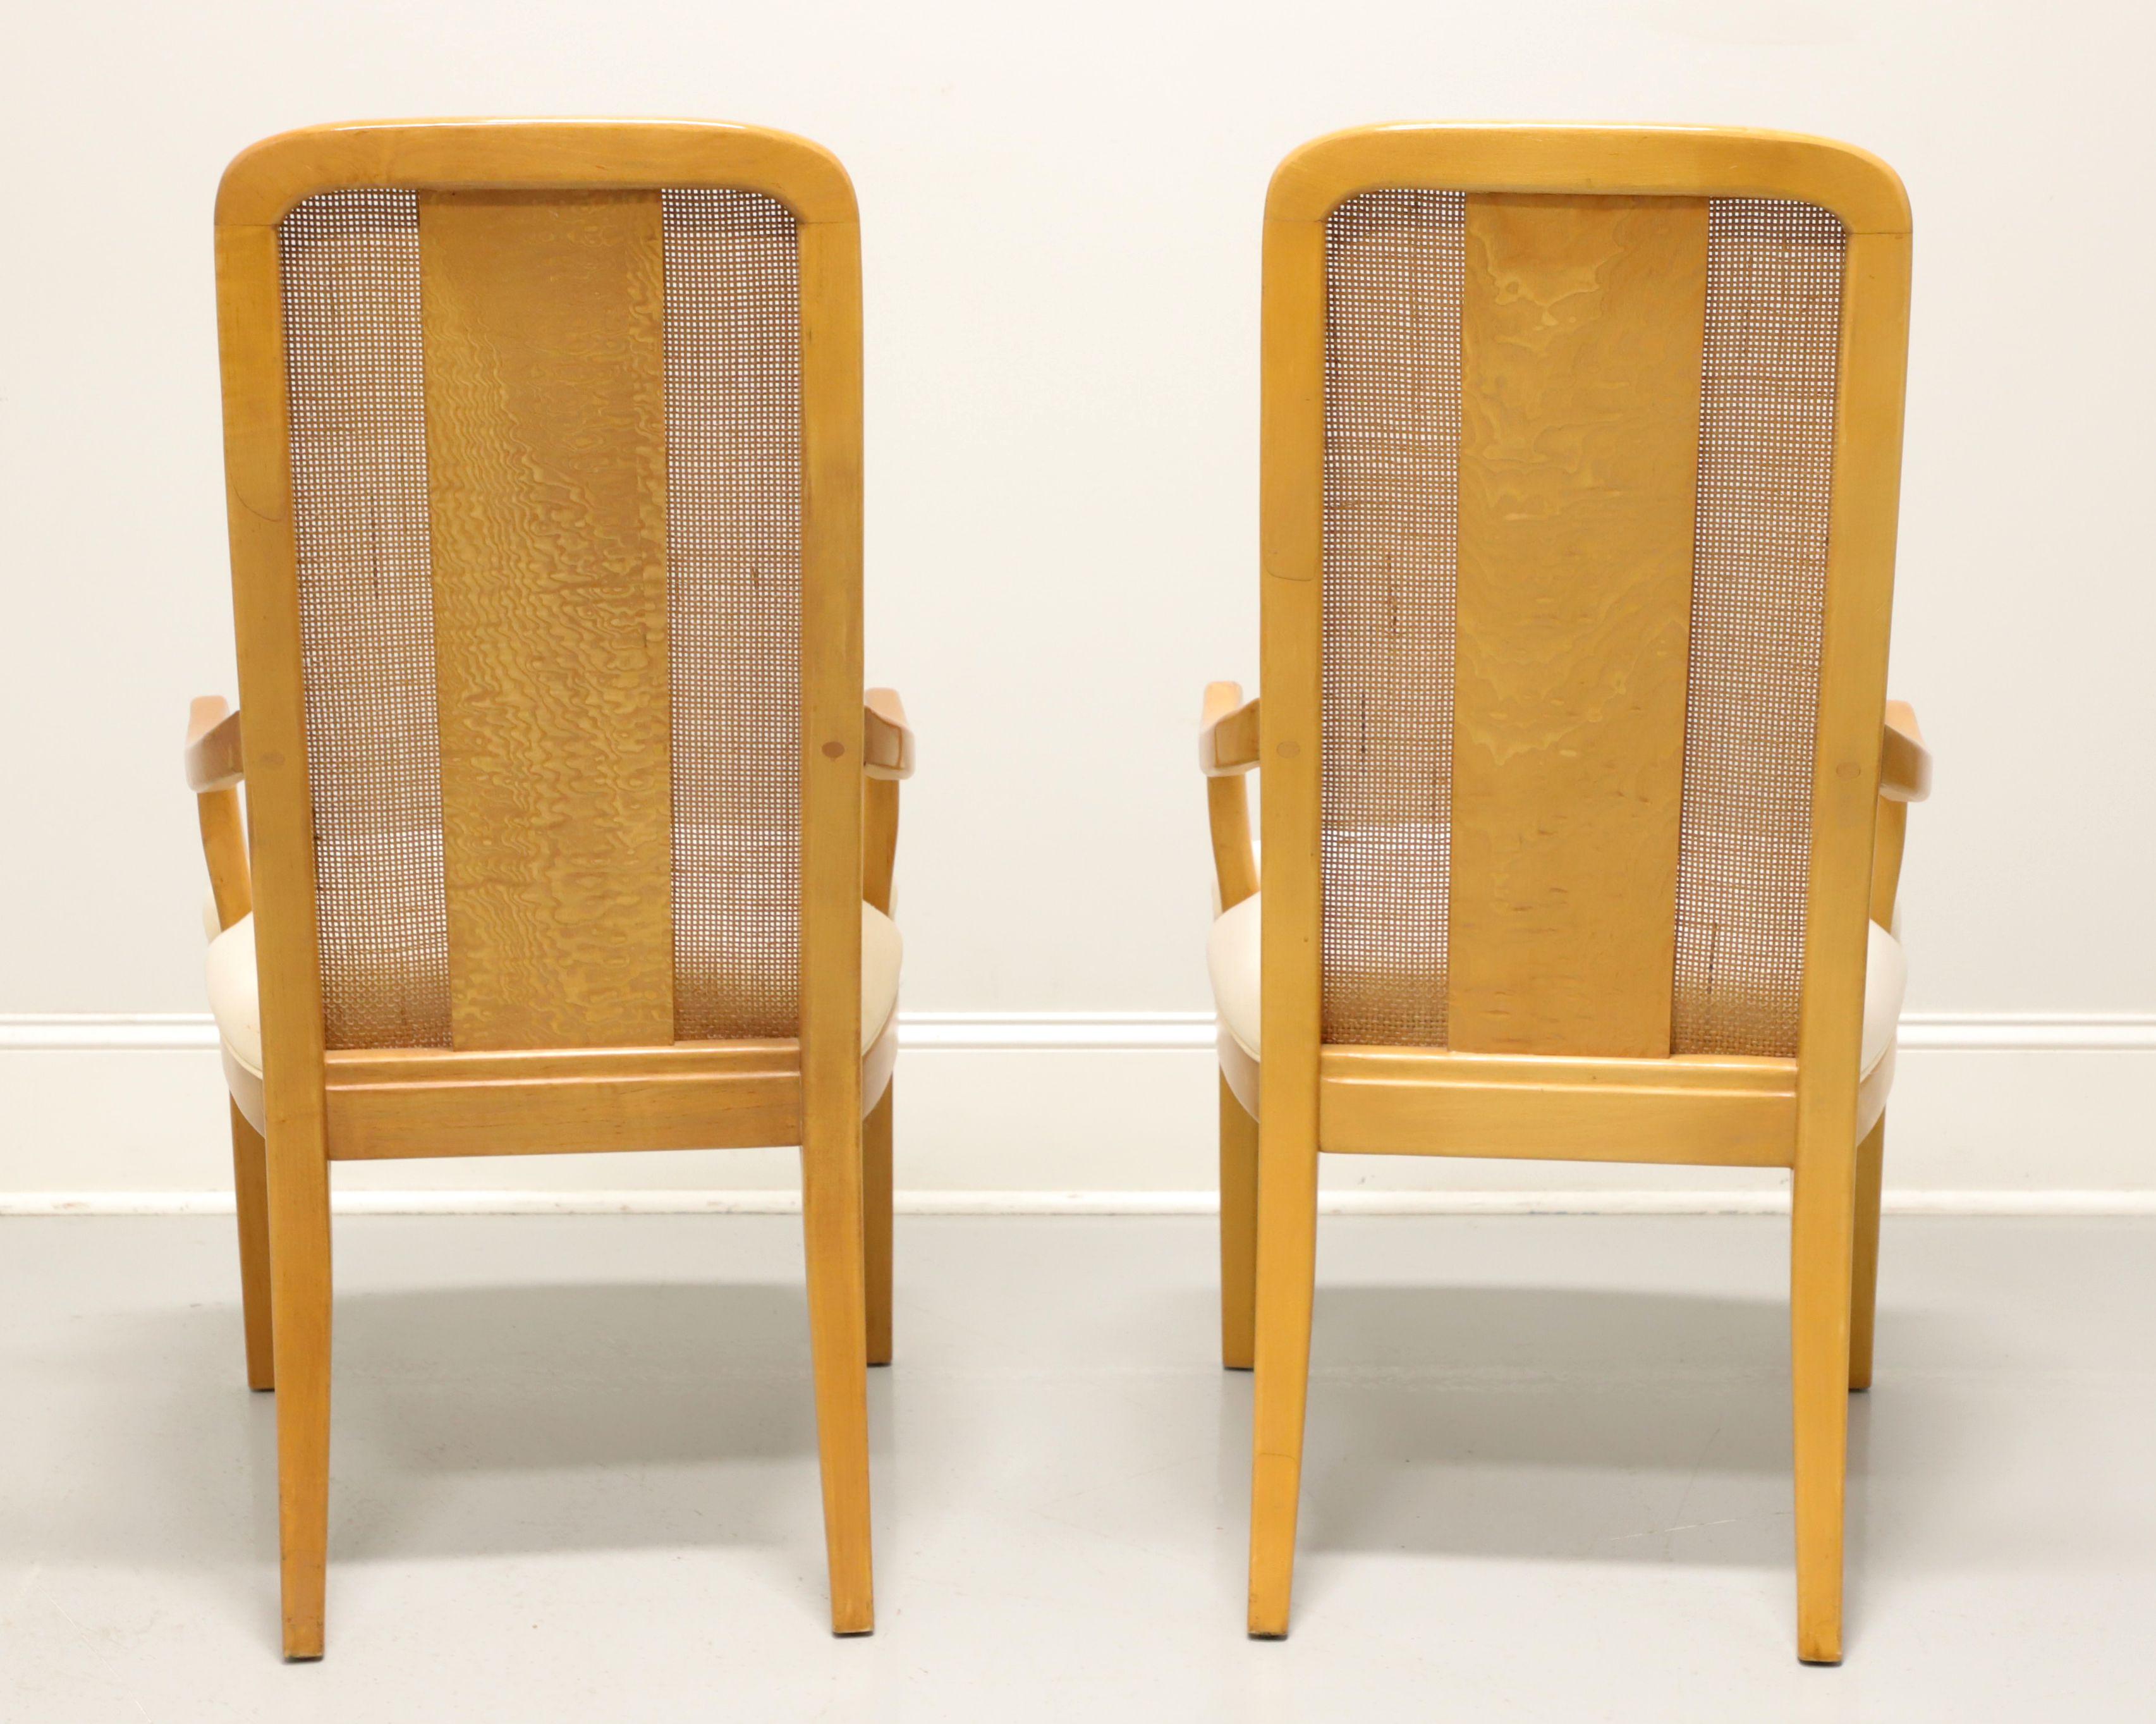 BERNHARDT Caned Burl Maple Contemporary Dining Armchairs - Pair In Good Condition For Sale In Charlotte, NC